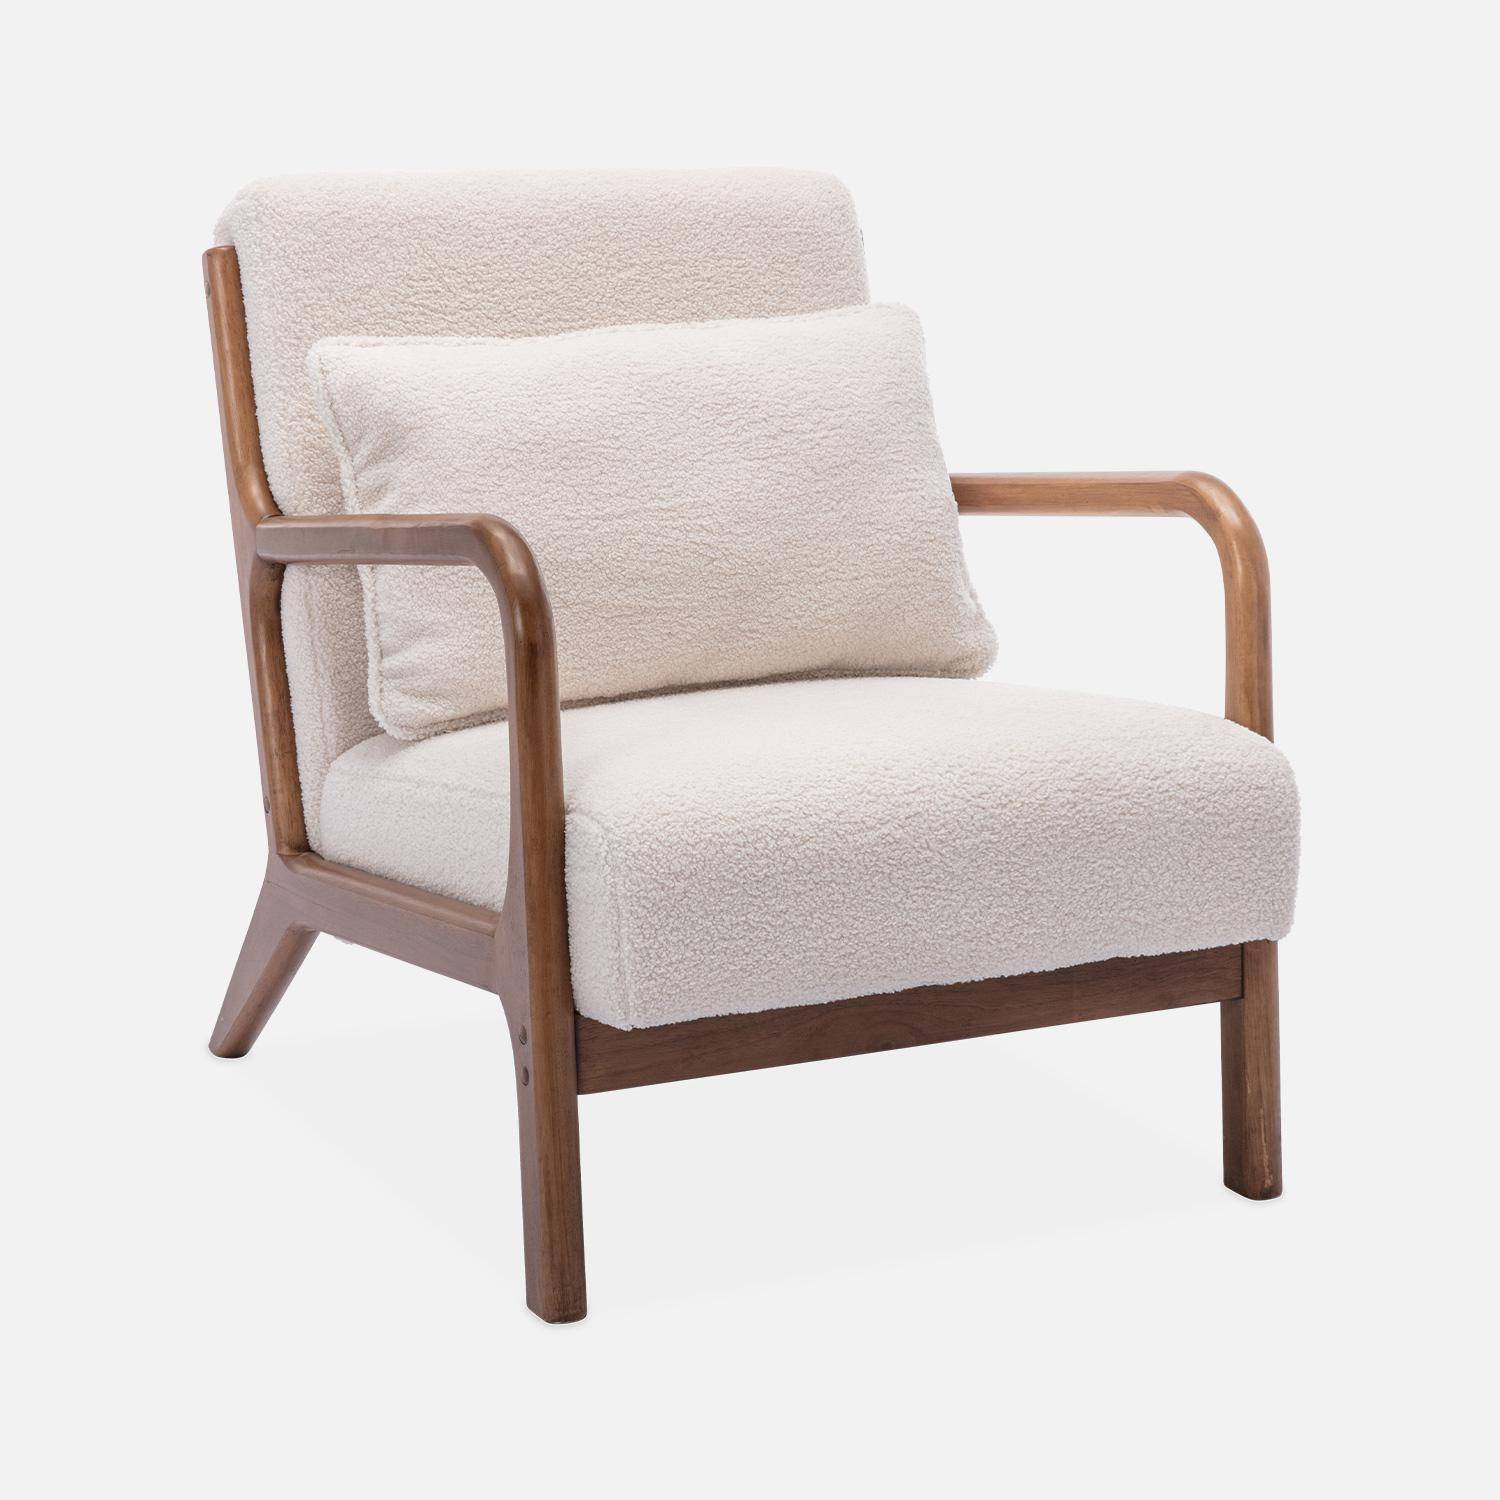 Cosy boucle wooden armchair with scandi-style compass legs and cushion, Light Walnut Stained Hevea Wood, Lorens, White,sweeek,Photo3